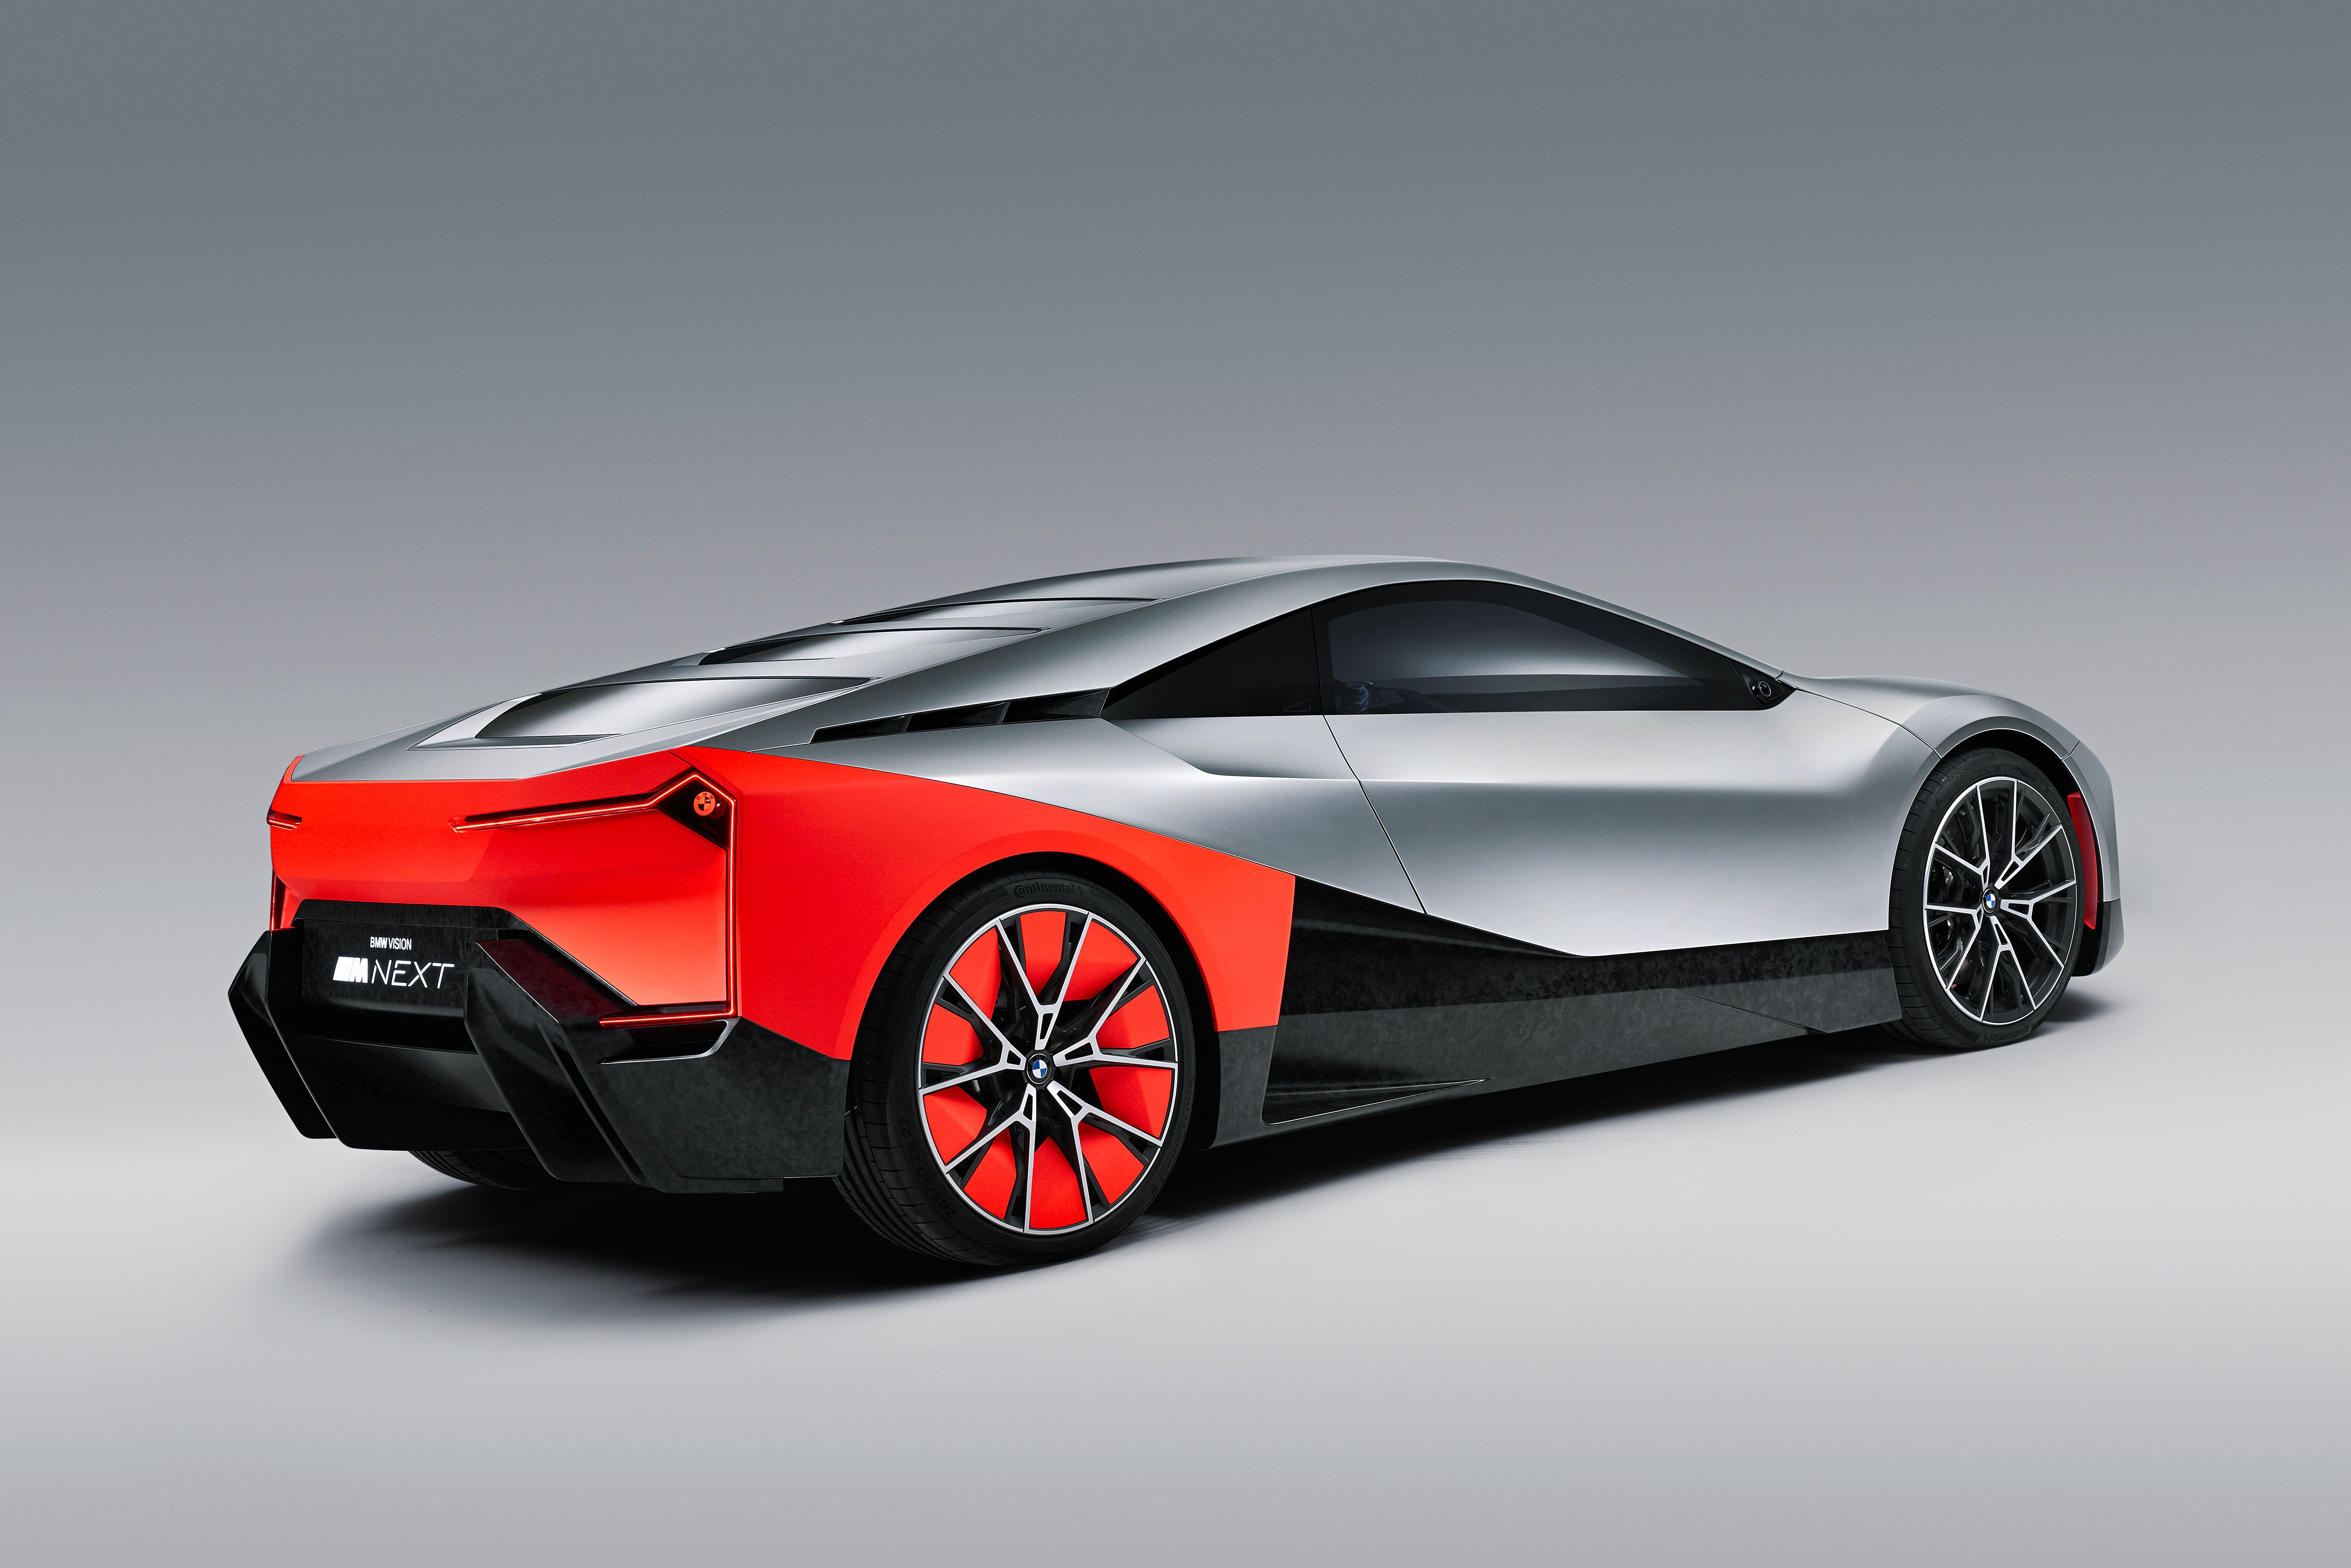 2018 - 2019 Does the self-driving BMW M Next concept Actually Preview the Next-Gen BMW i8?